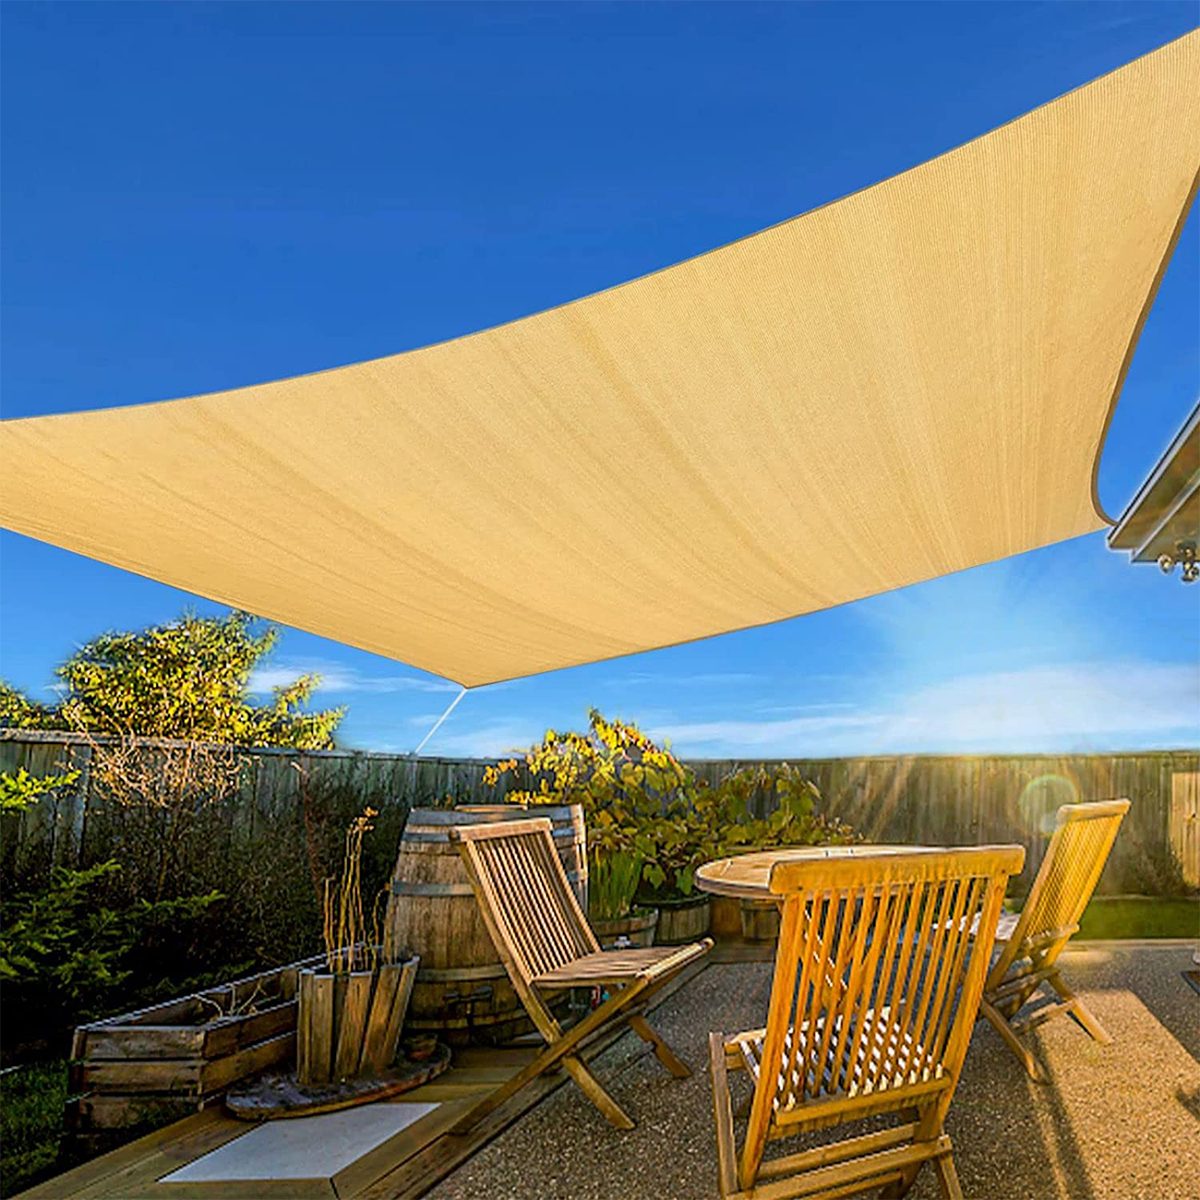 <h3 class="">Artpuch Shade Sail</h3> <p>For an affordable price, you can snatch up this highly rated <a href="https://www.amazon.com/dp/B074NHPRY7" rel="noopener">Artpuch patio shade sail</a>. Don't be fooled by its bargain price, though. Amazon reviewers are just as happy with the quality as the price tag. Use the durable stainless steel D-rings to easily attach the corners to any sturdy connection point to add plenty of sun protection to your patio or <a href="https://www.familyhandyman.com/list/rooftop-deck-ideas/">rooftop deck</a>. Available in several sizes and colors, you'll certainly find one that matches your outdoor aesthetic.</p> <p>"I had one side of my house with zero shade, so not comfortable to sit outside when the was sun is blazing down. Now I have a huge area to sit in whenever I want and can get out of the wind and rain," writes <a href="https://www.amazon.com/gp/customer-reviews/R12T5K1Z5BCOUL" rel="noopener">Joseph Arbon</a>, a five-star reviewer.</p> <p><strong>Pros</strong></p> <ul> <li class="">Affordable</li> <li>Blocks up to 95% of UV rays</li> <li>Available in 11 colors and 63 sizes</li> </ul> <p><strong>Cons</strong></p> <ul> <li class="">Material may not be as durable as other options</li> </ul> <p class="listicle-page__cta-button-shop"><a class="shop-btn" href="https://www.amazon.com/dp/B074NHPRY7">Shop Now</a></p>